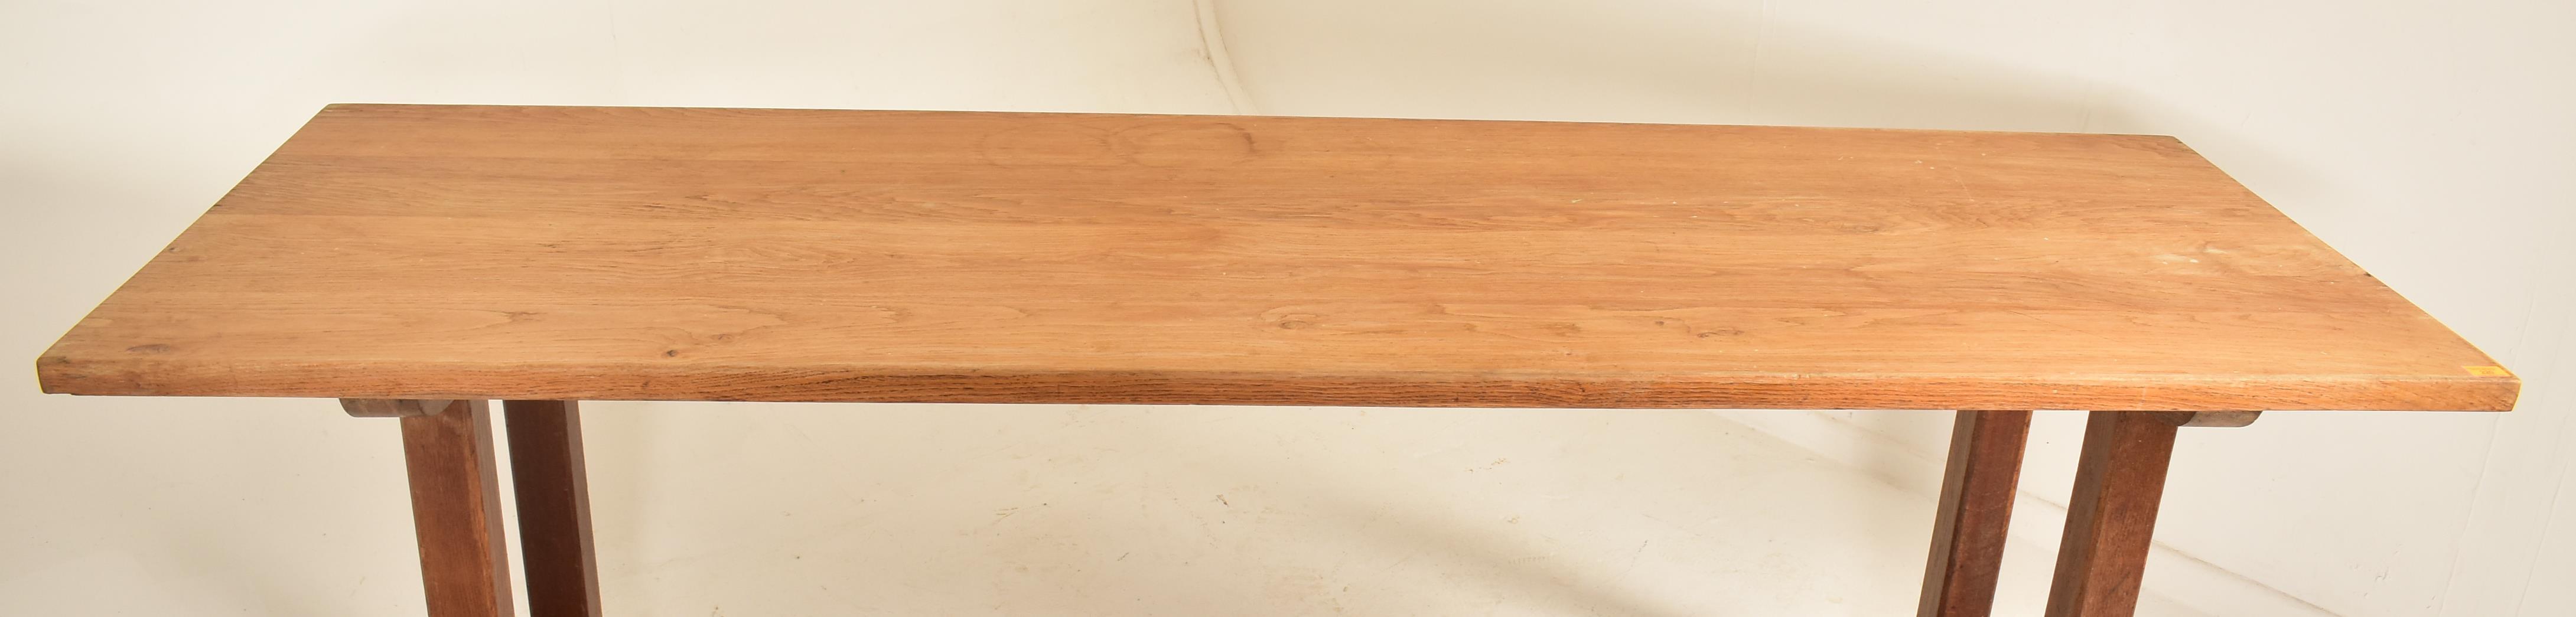 WITHDRAWN - LARGE 20TH CENTURY SOLID ELM REFECTORY DINING TABLE - Image 2 of 5